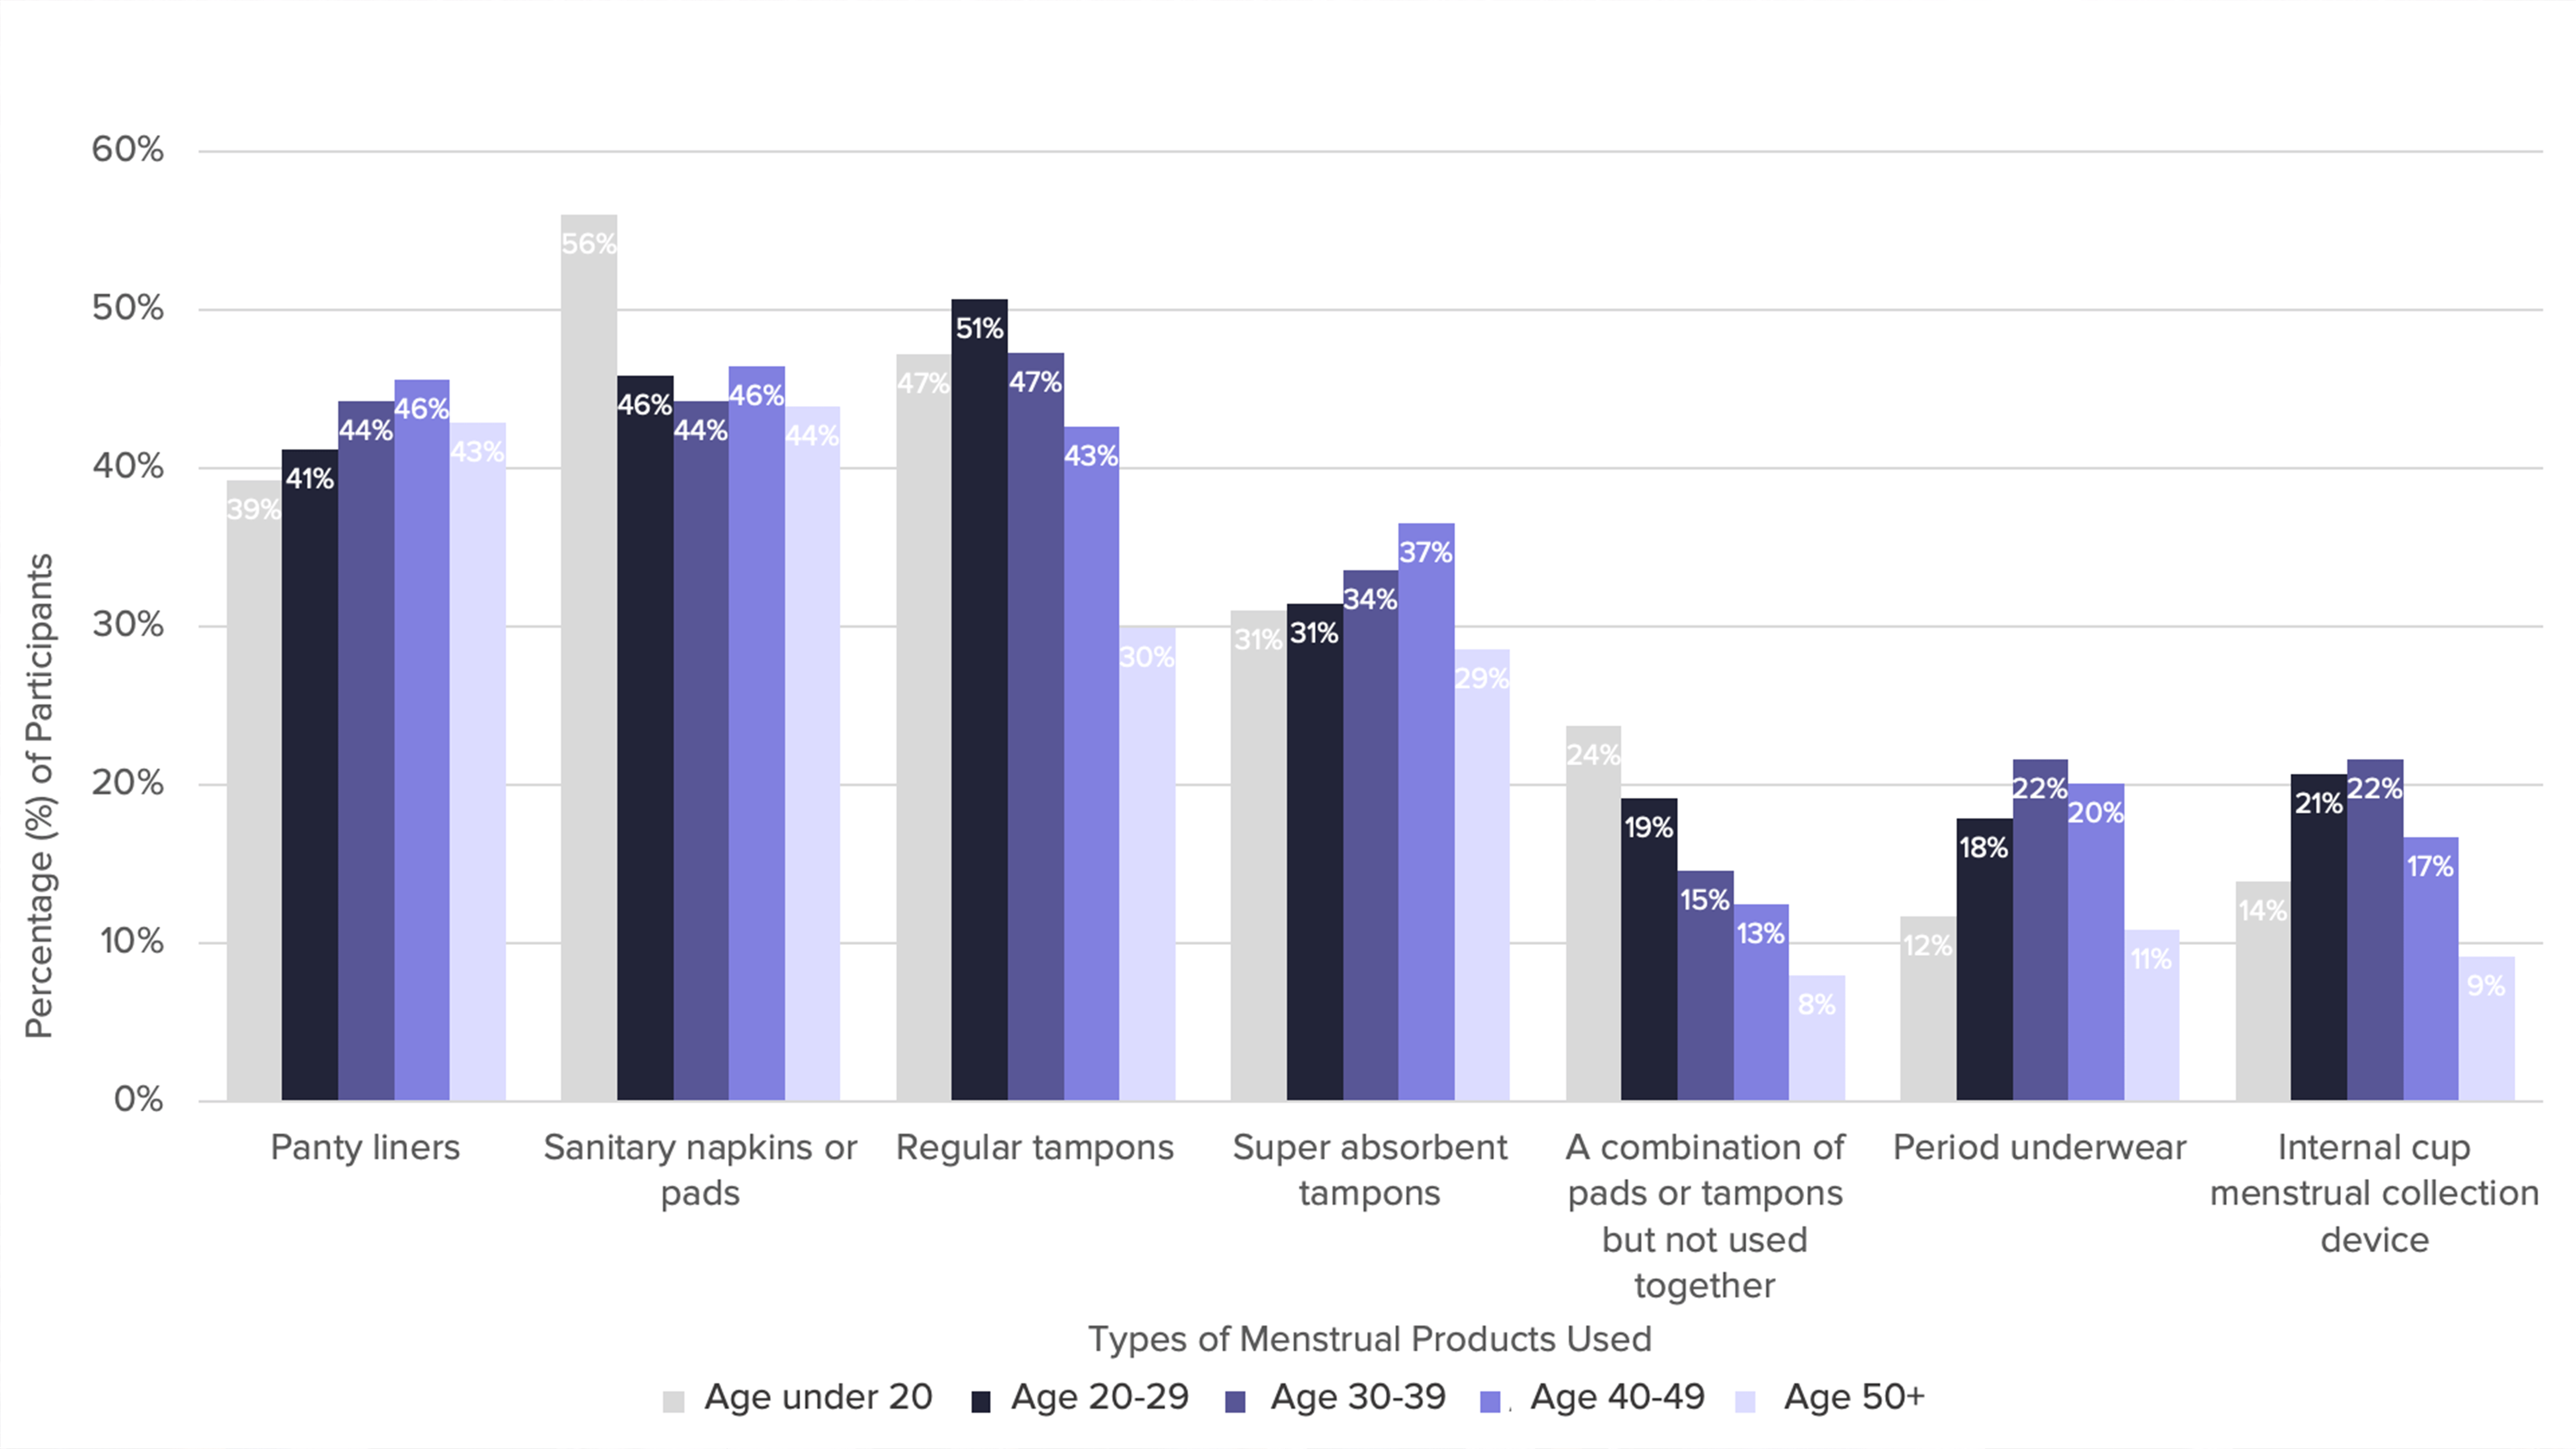 The figure shows product use by age range using the groups under 20, 20-29, 30-39, 40-49, and 50+. The products examined are panty liners, sanitary napkins or pads, regular tampons, super absorbent tampons, a combination of pads or tampons but not used together, period underwear, and internal cup menstrual collection device. 